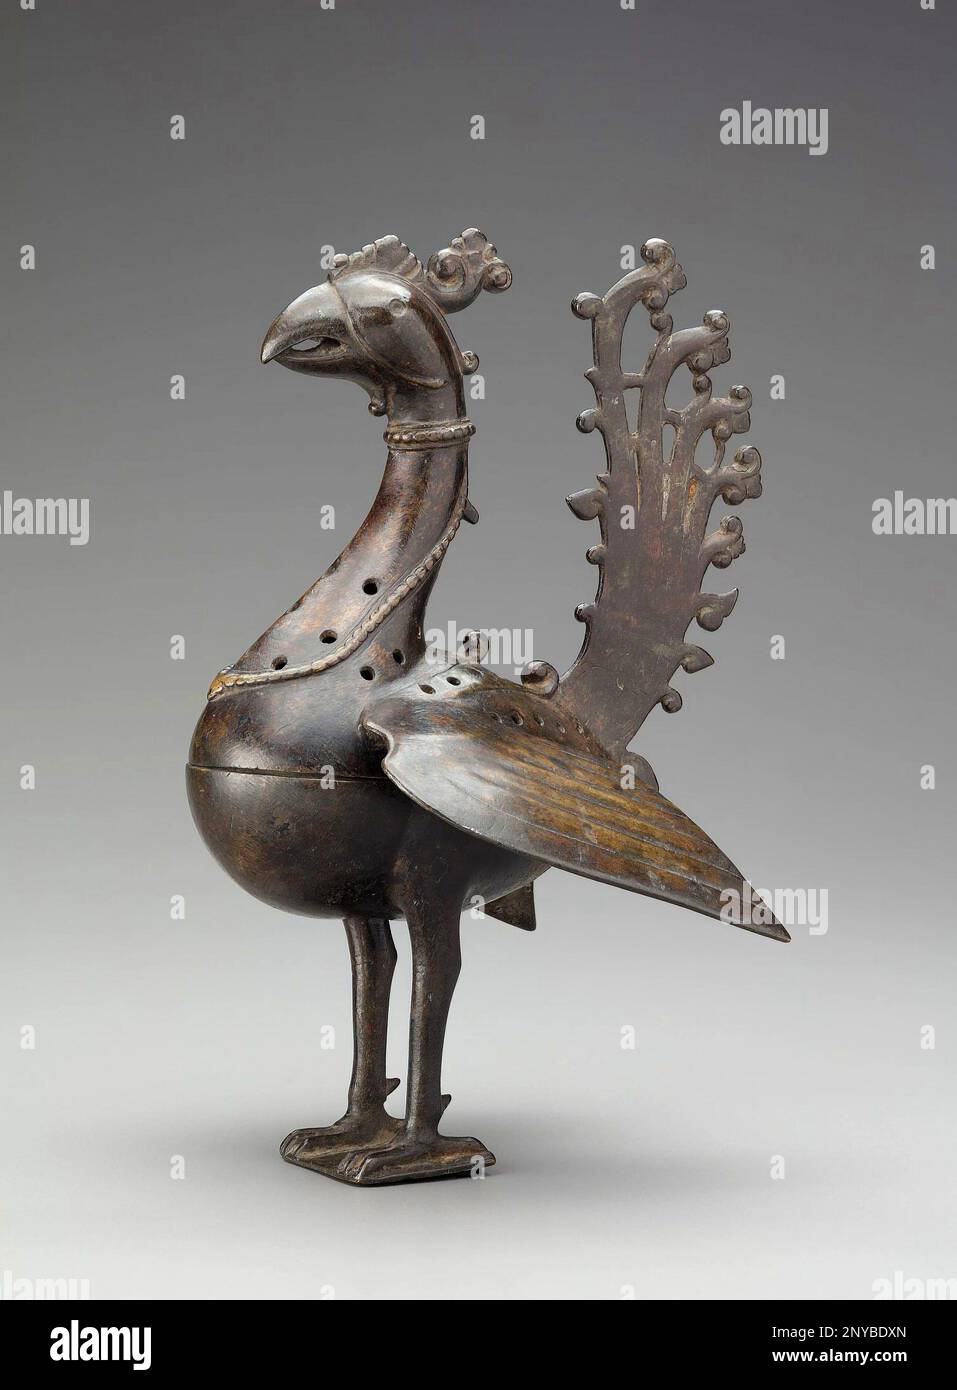 Peacock-shaped Incense Burner, late 15th - mid 16th century.Indian.Brass. This peacock-shaped incense burner is a fine and rare example of metalwork Stock Photo